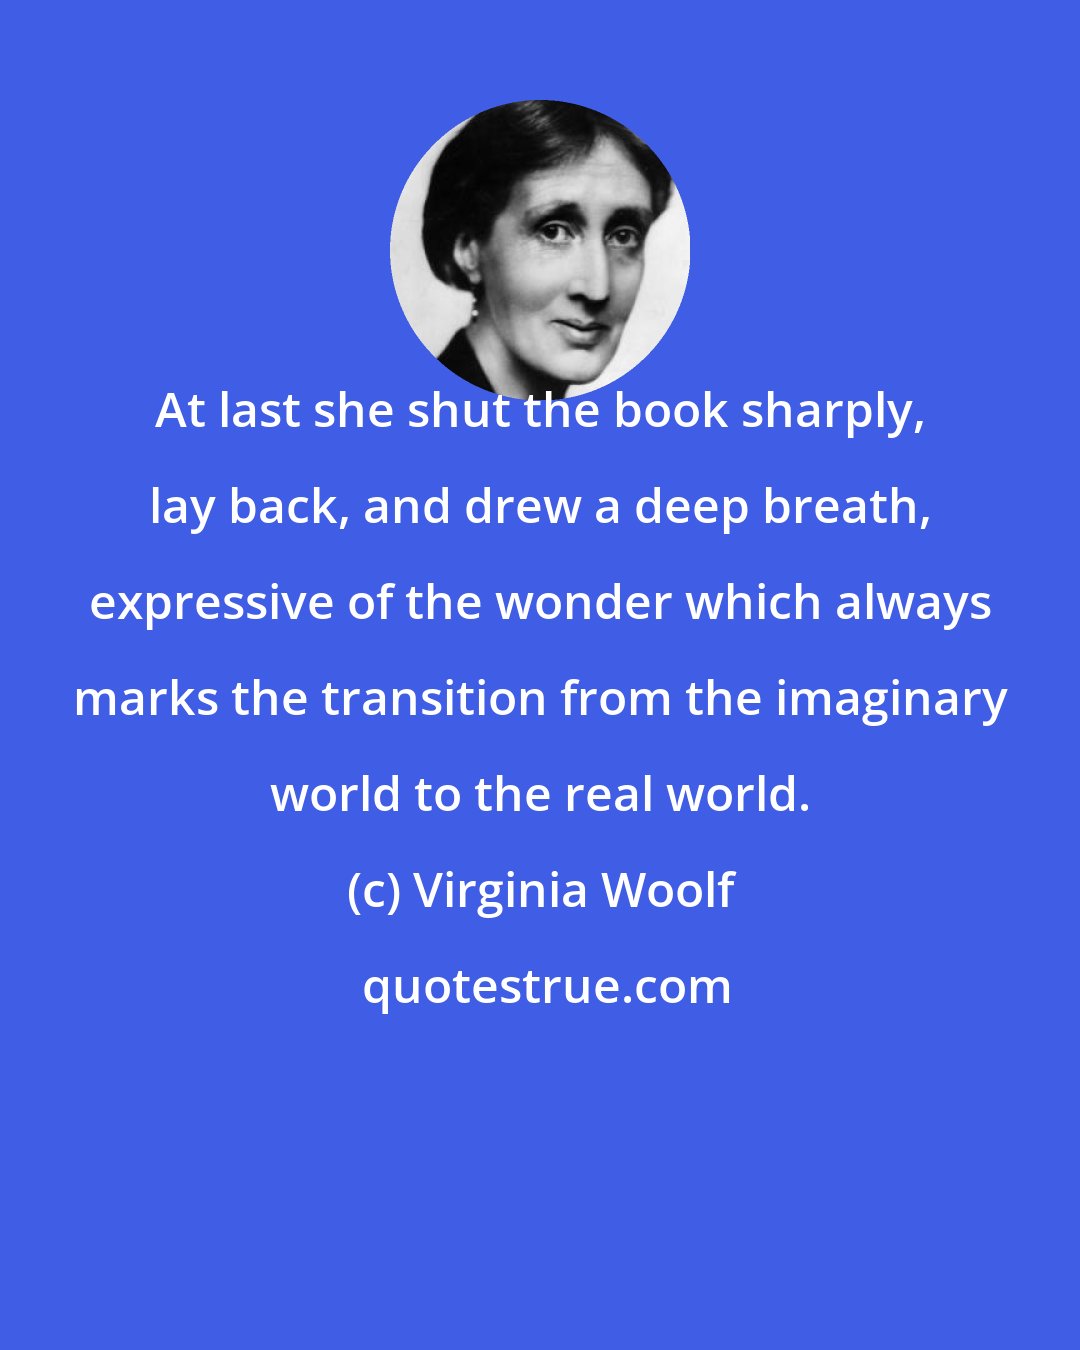 Virginia Woolf: At last she shut the book sharply, lay back, and drew a deep breath, expressive of the wonder which always marks the transition from the imaginary world to the real world.